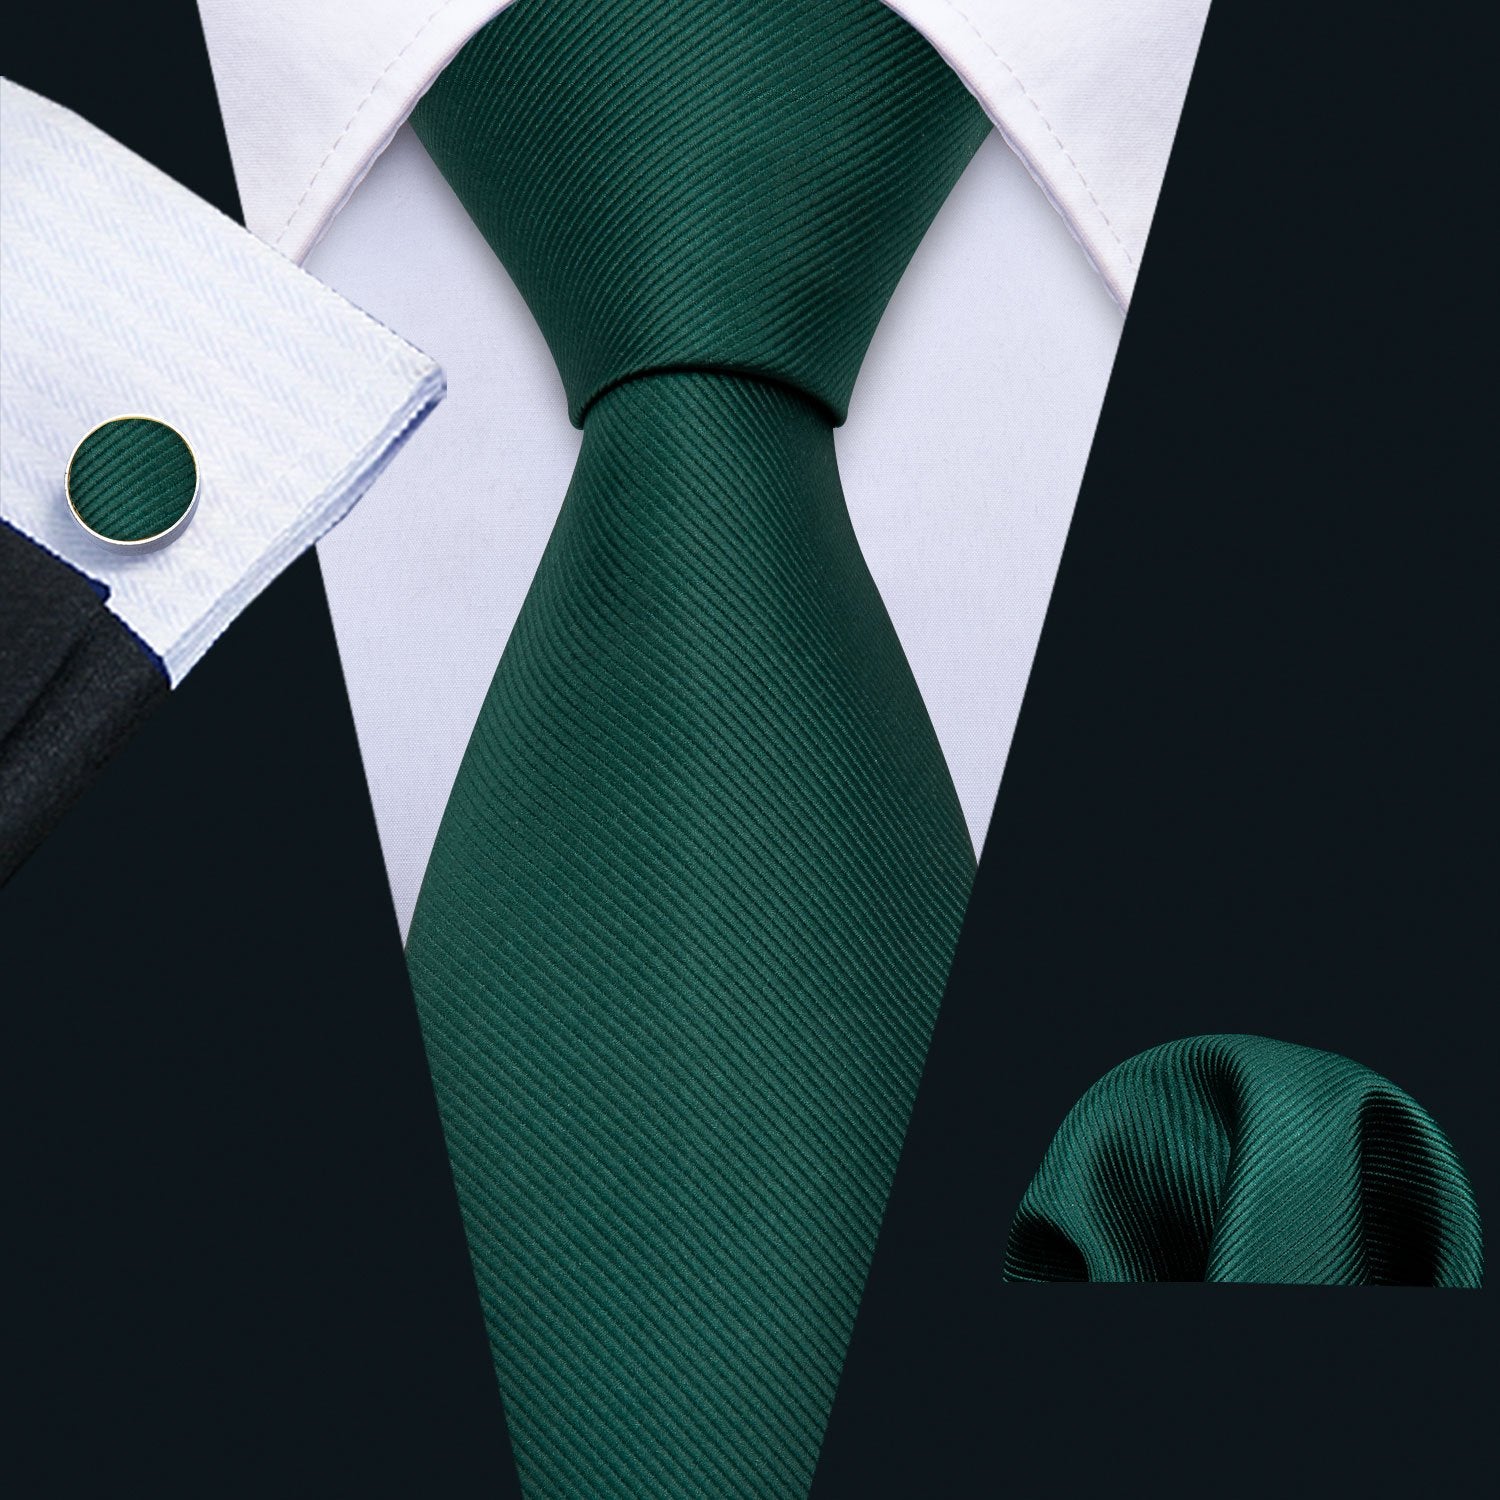 Green Solid Tie Pocket Square Cufflinks Set 8.5cm Fashion Designer Neckties with Brooches Easy Matching